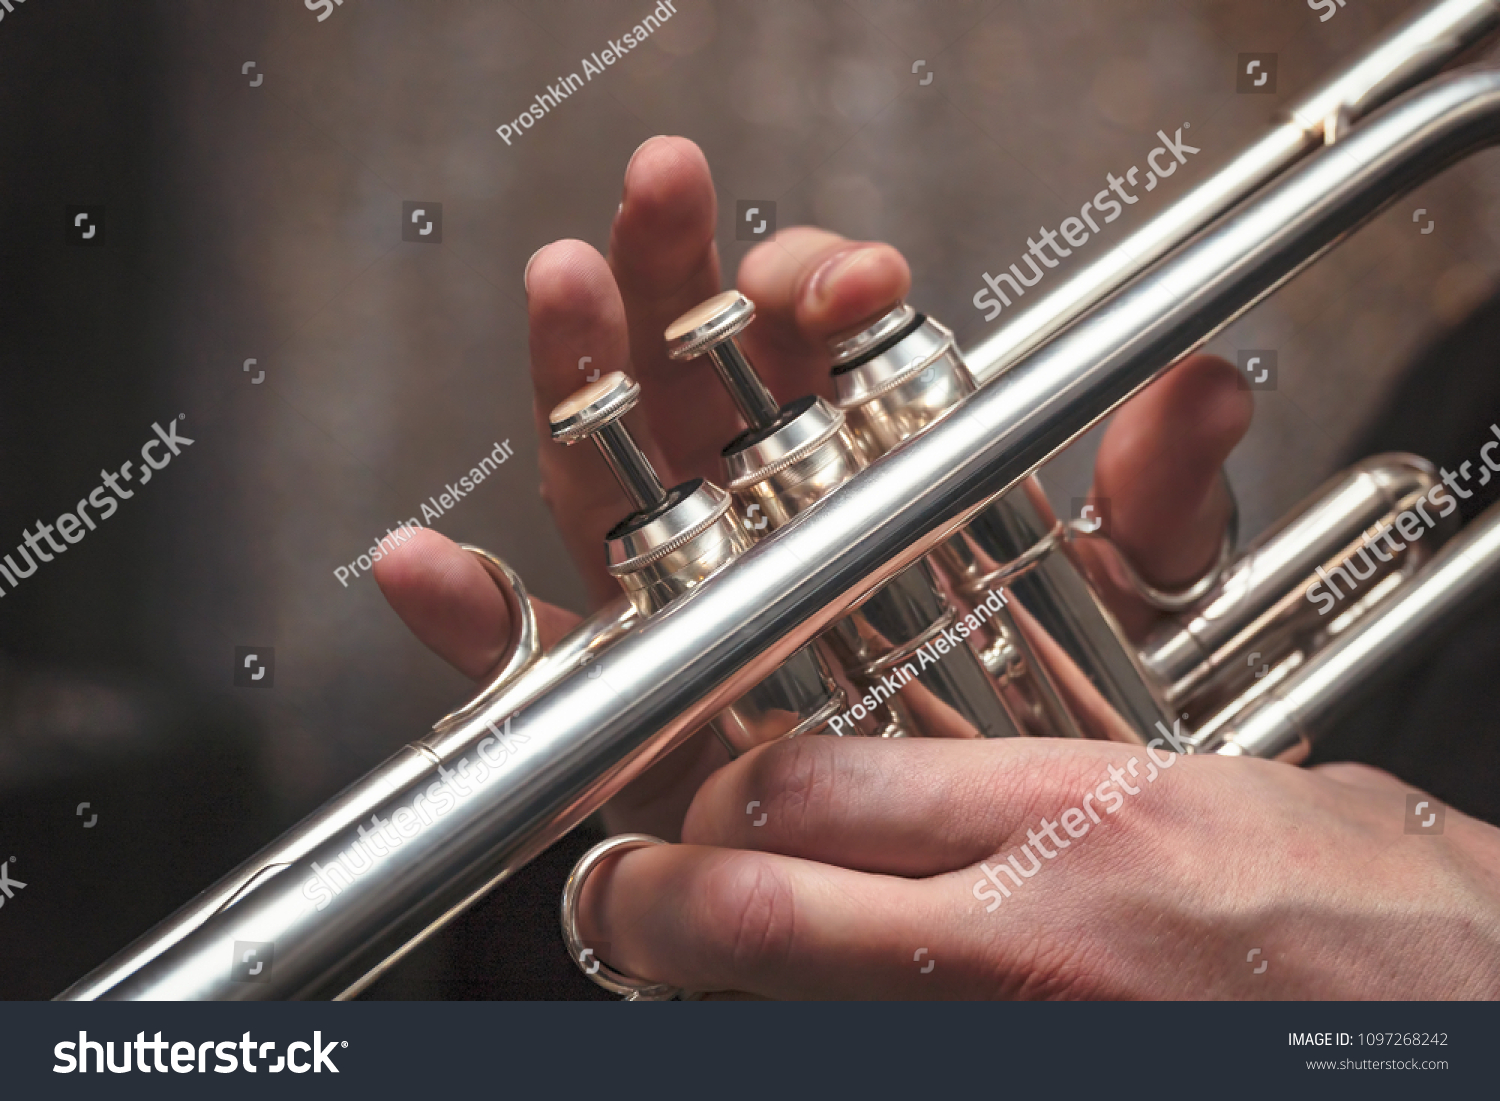 Hand of the Trumpeter on the buttons of the trumpet #1097268242